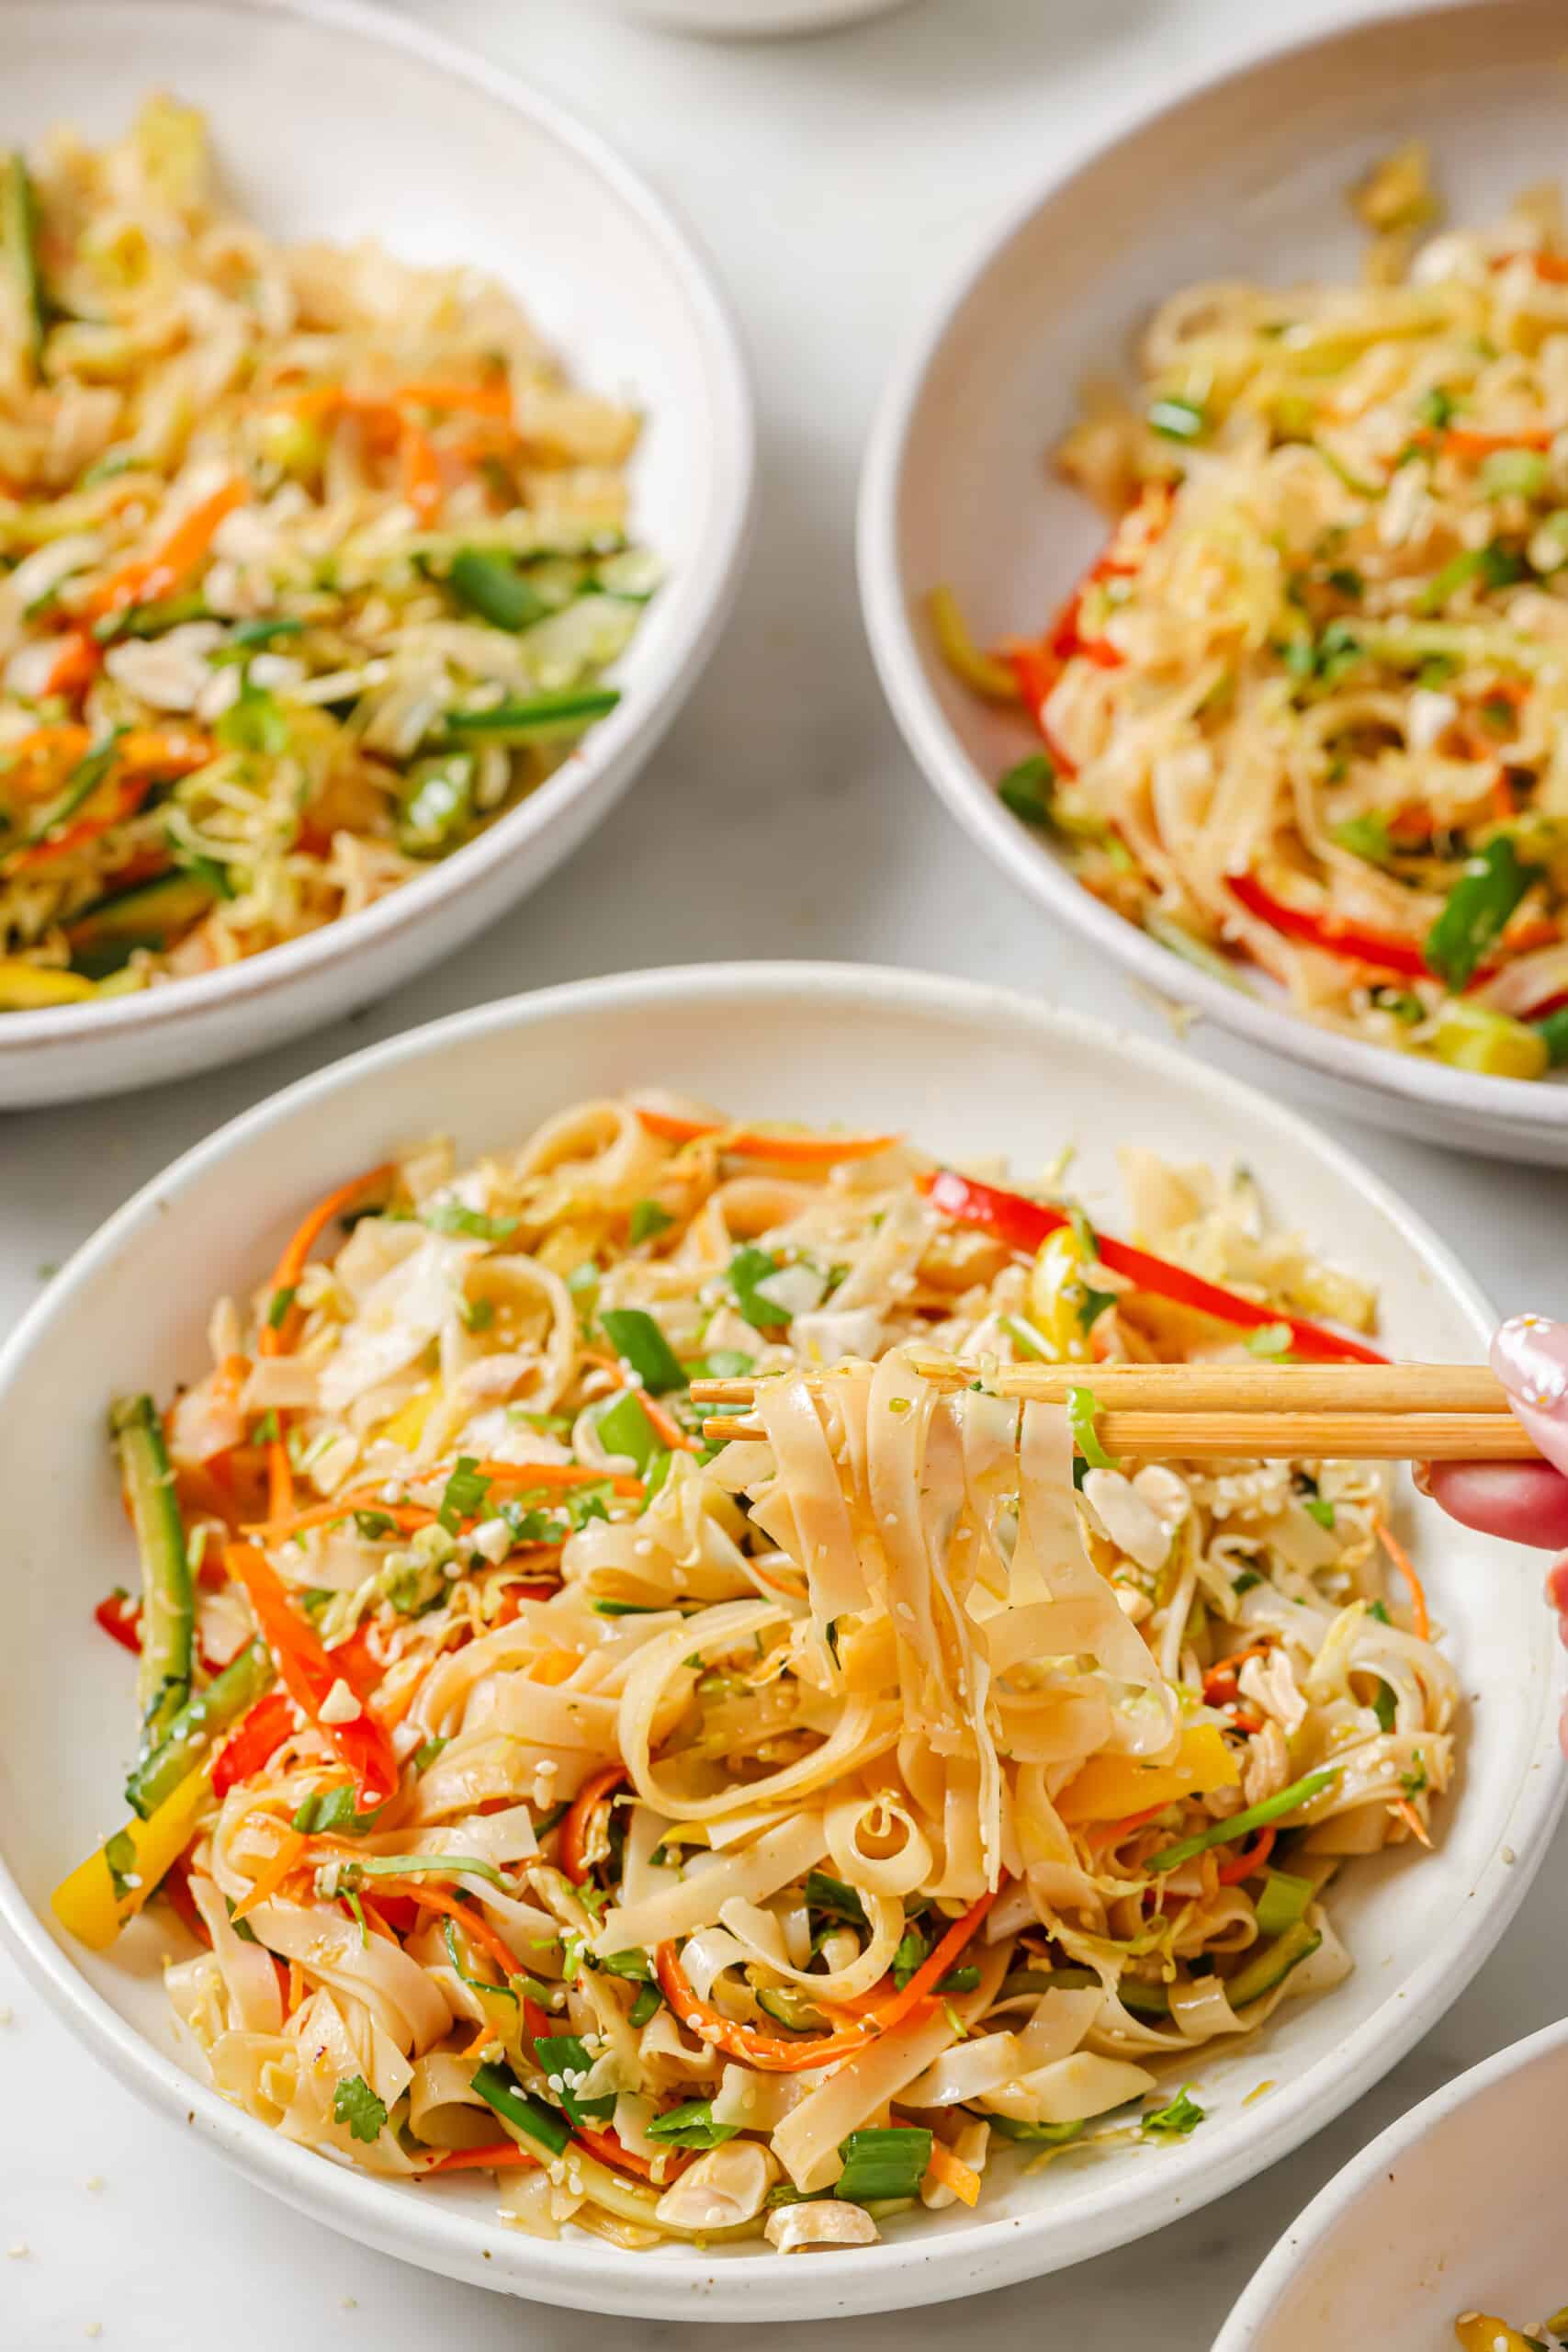 Three bowls of Asian noodle salad with sesame dressing.